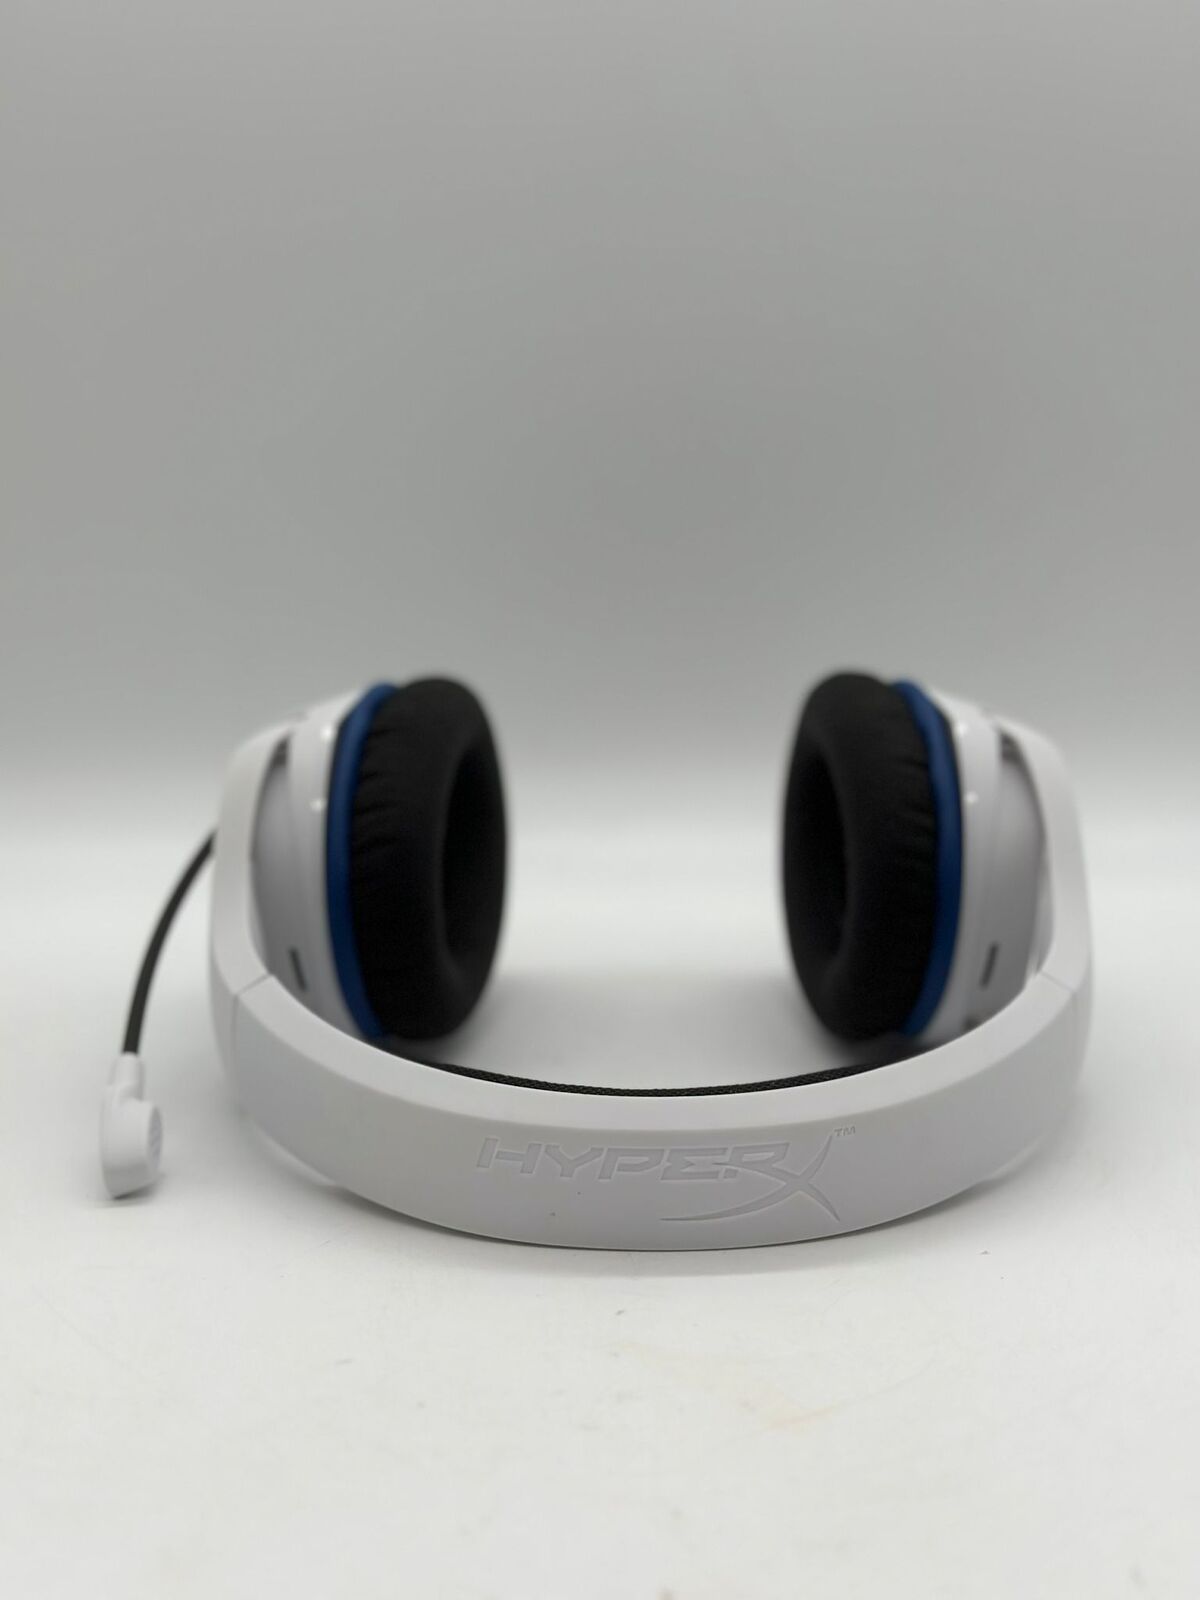 Wireless Gaming Cloud Core HyperX Headset Stinger (Pre-Owned) White